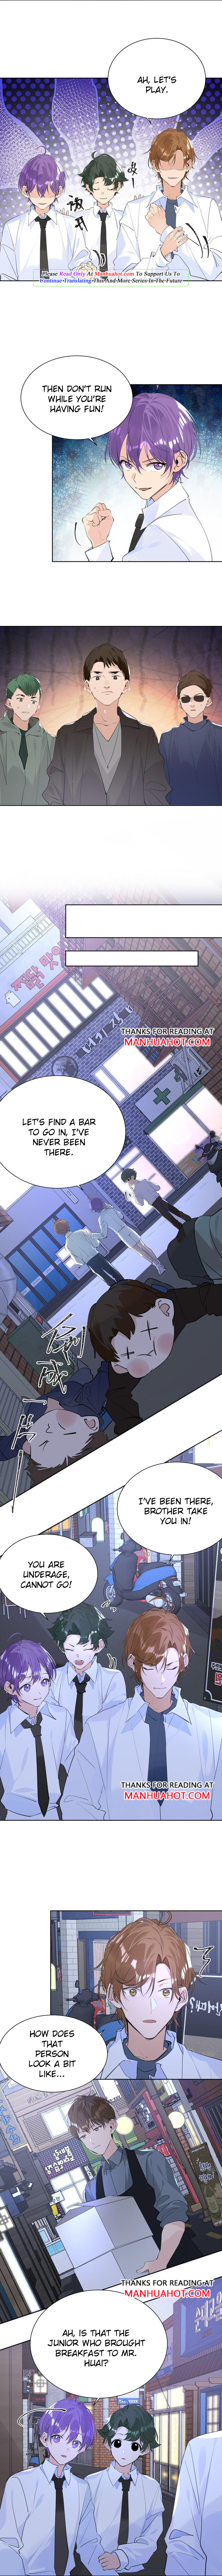 Did The Nerd Manage To Flirt With The Cutie Today? - chapter 55 - #2